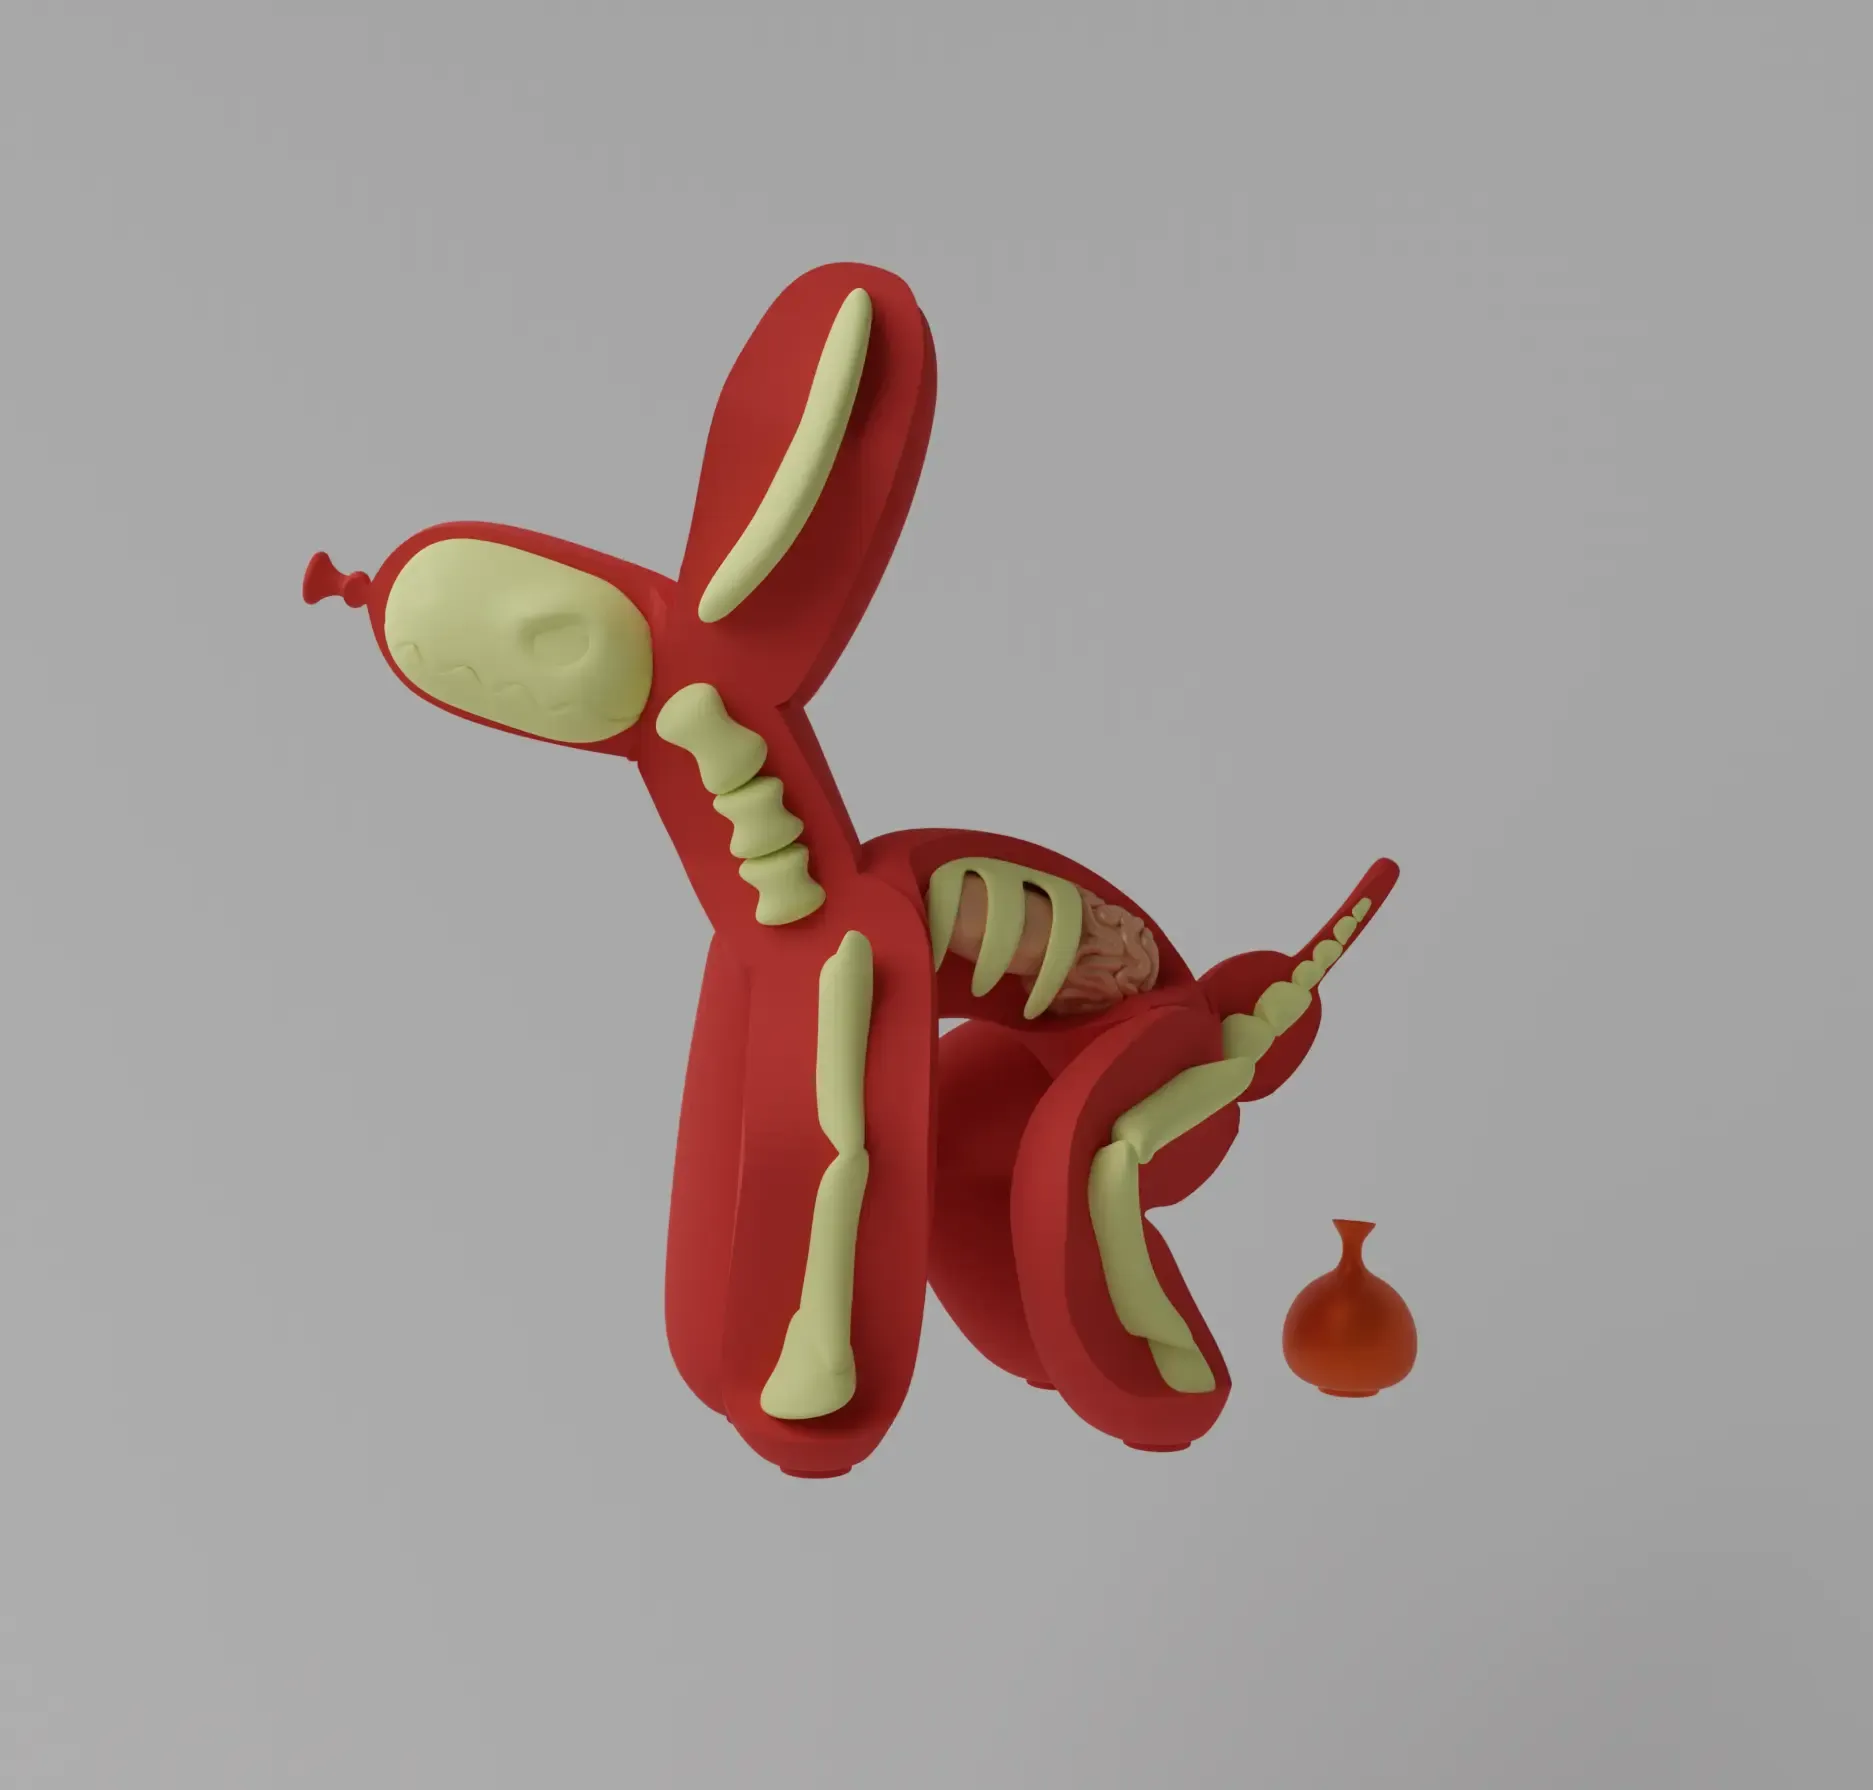 Balloon Dog Flayed Open Dissected Art Toy